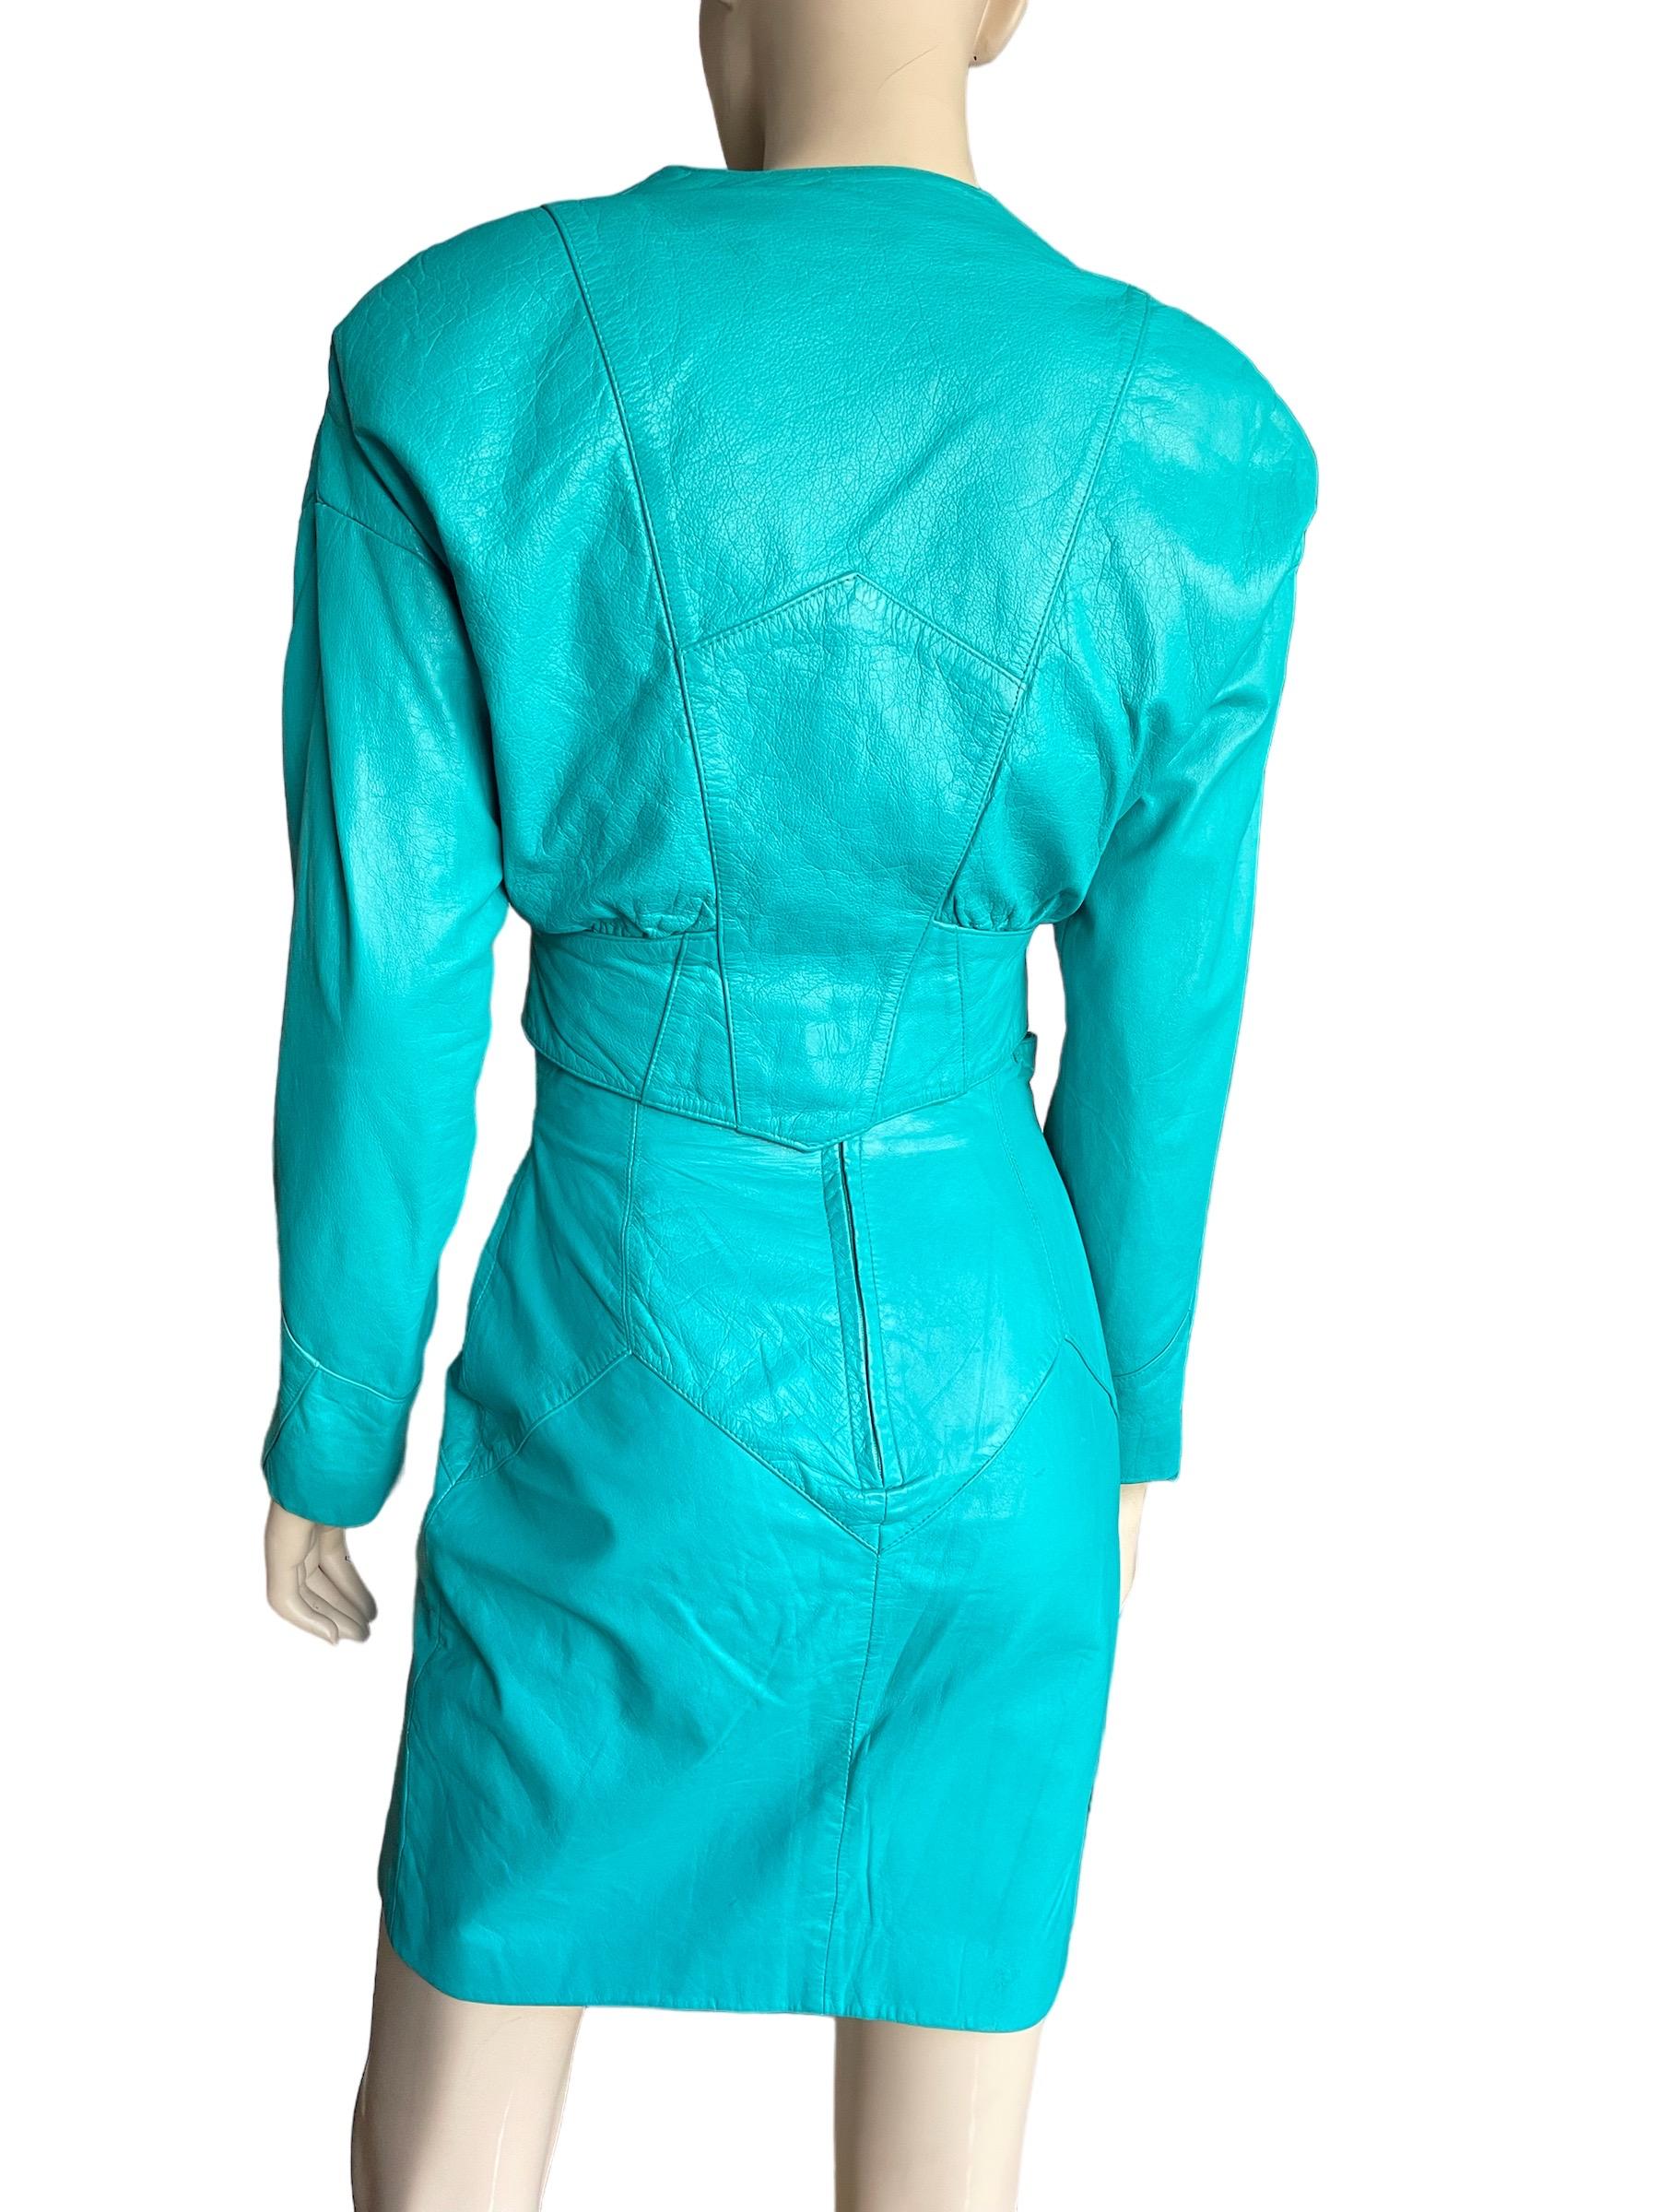 Women's or Men's 1980s Teal Leather Cropped Jacket and Skirt Set  For Sale